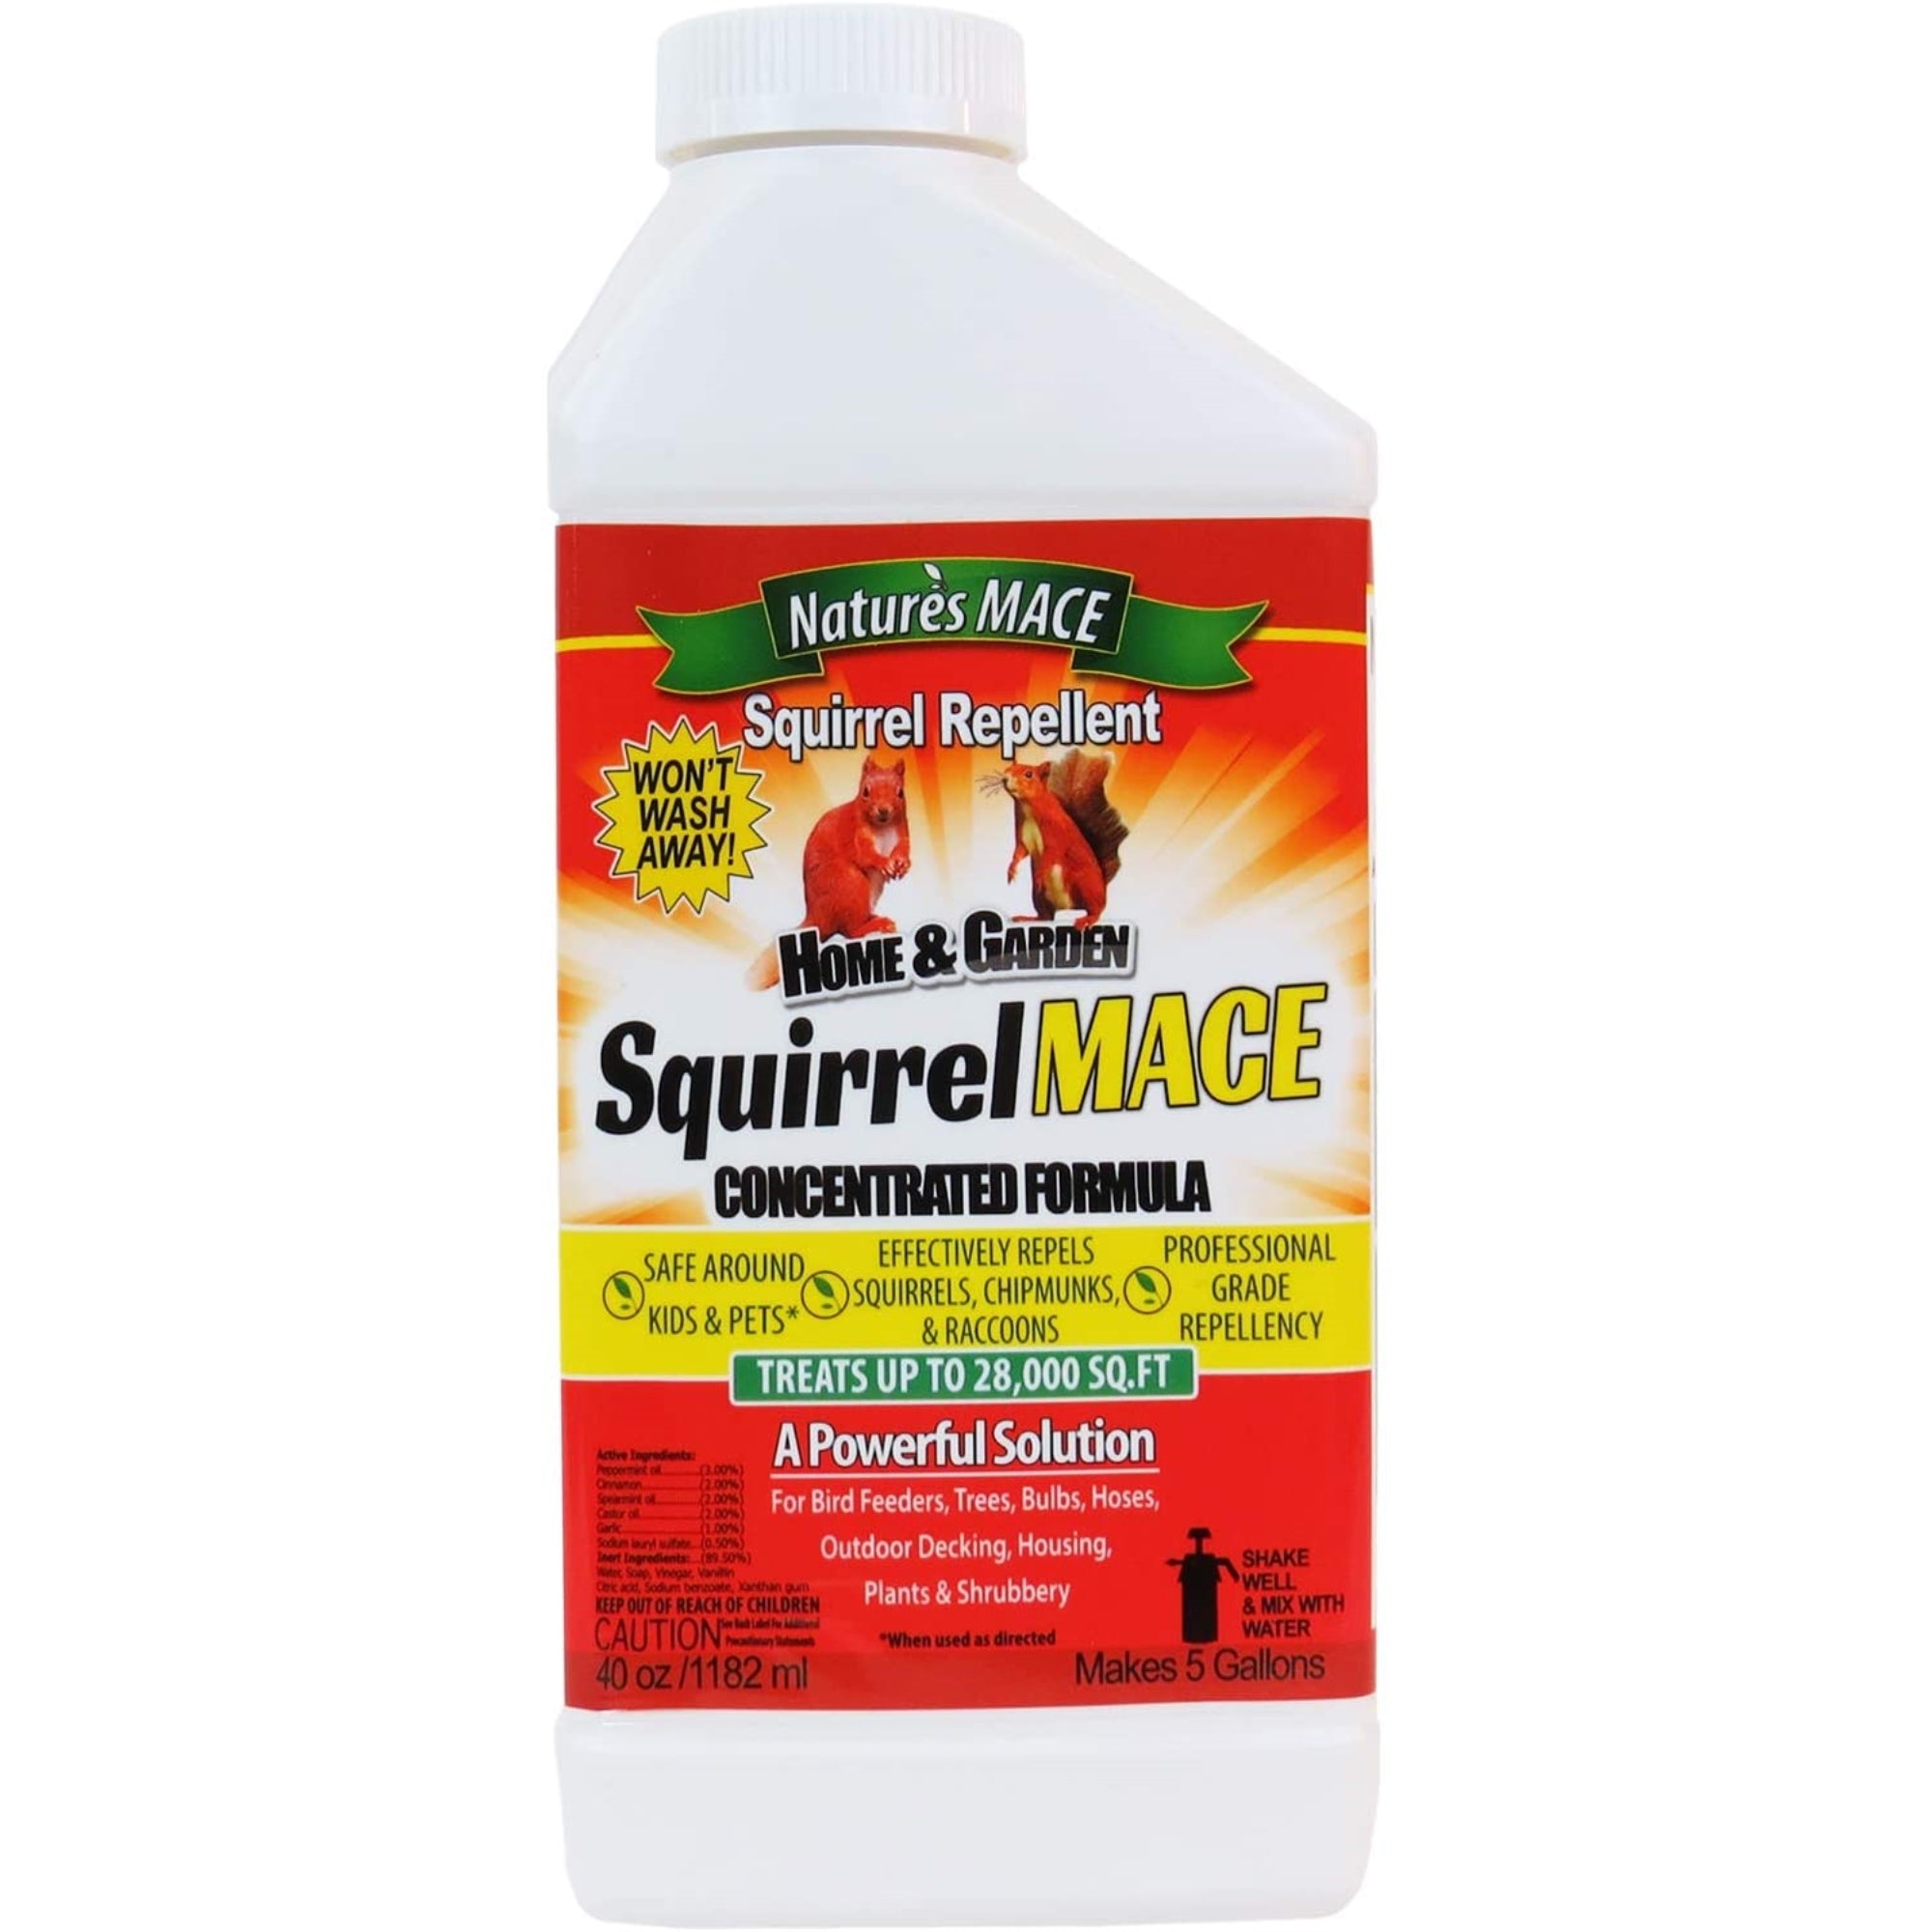 Nature's Mace Squirrel Repellent Concentrate/Covers 28,000 Sq Ft, 40oz